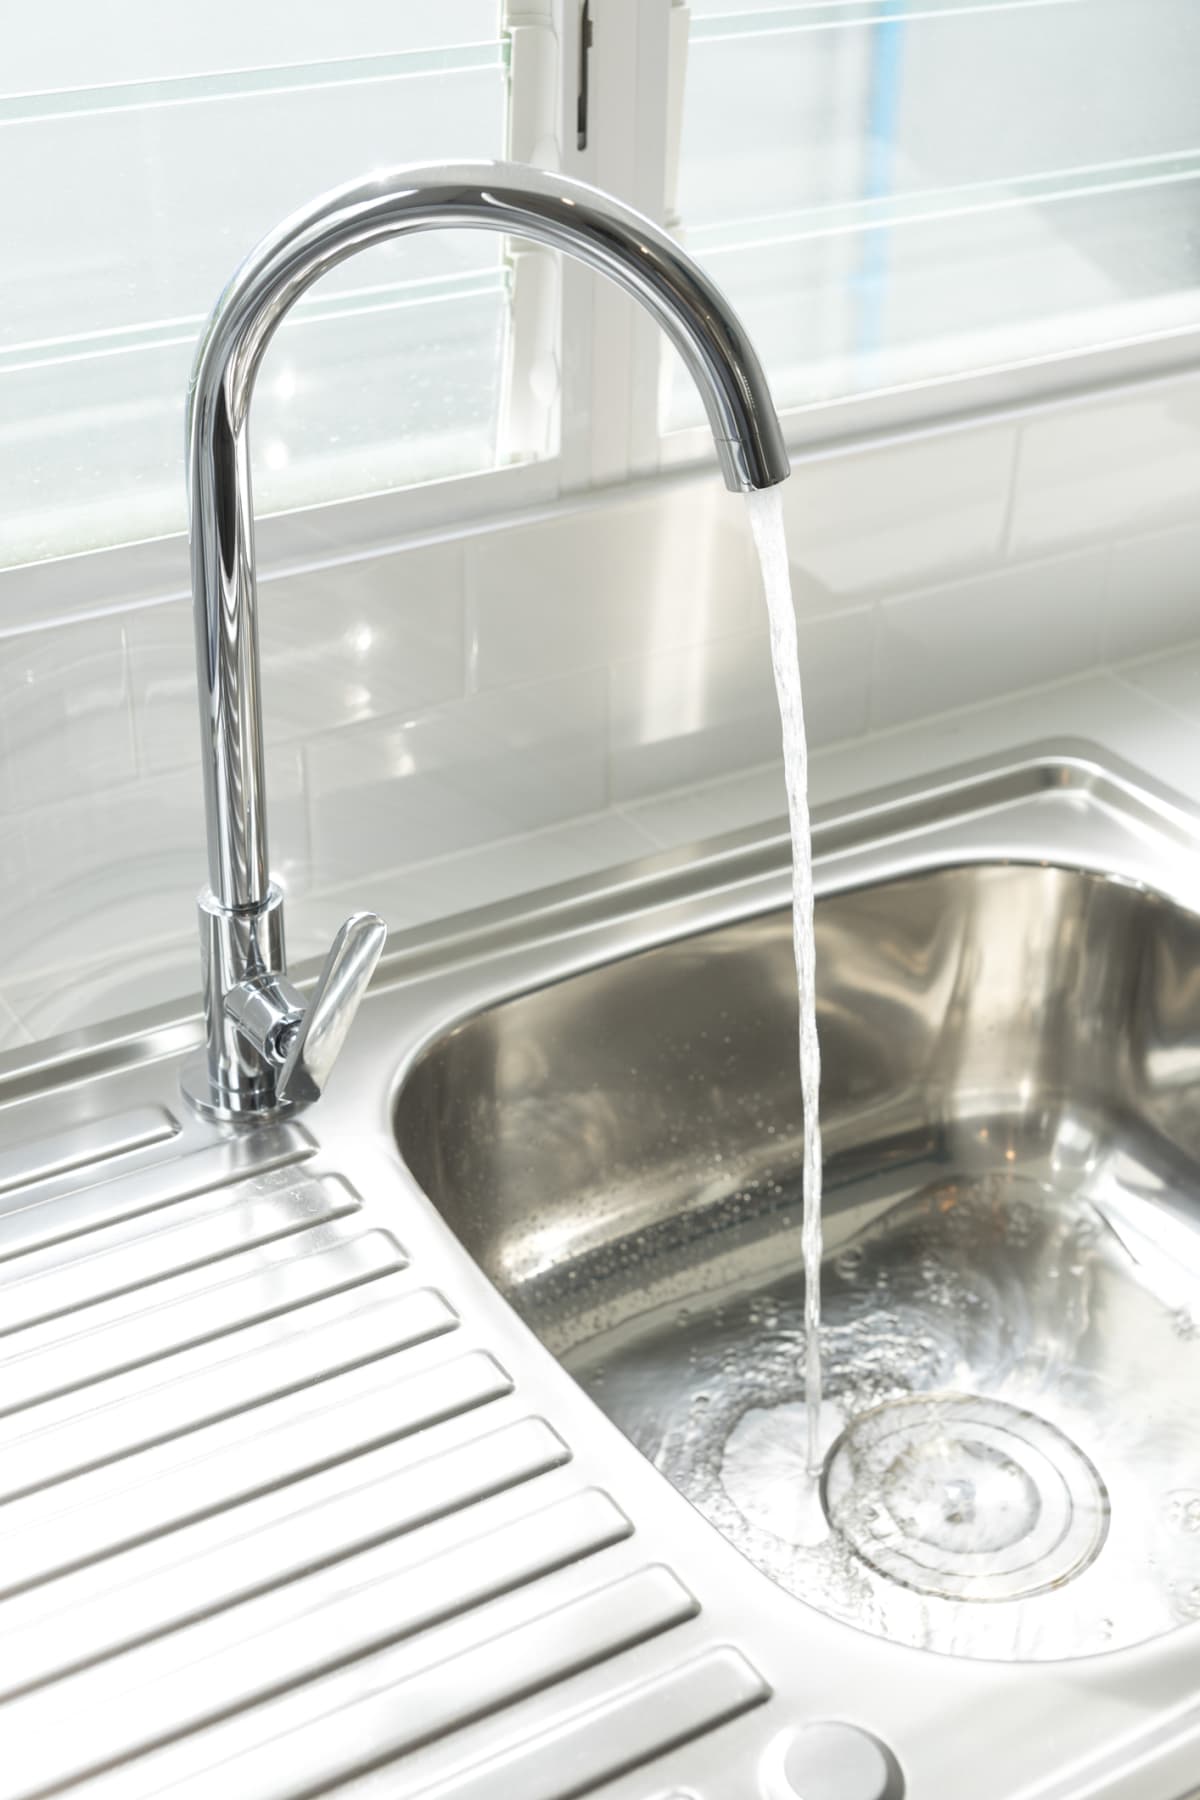 Kitchen sink with faucet running